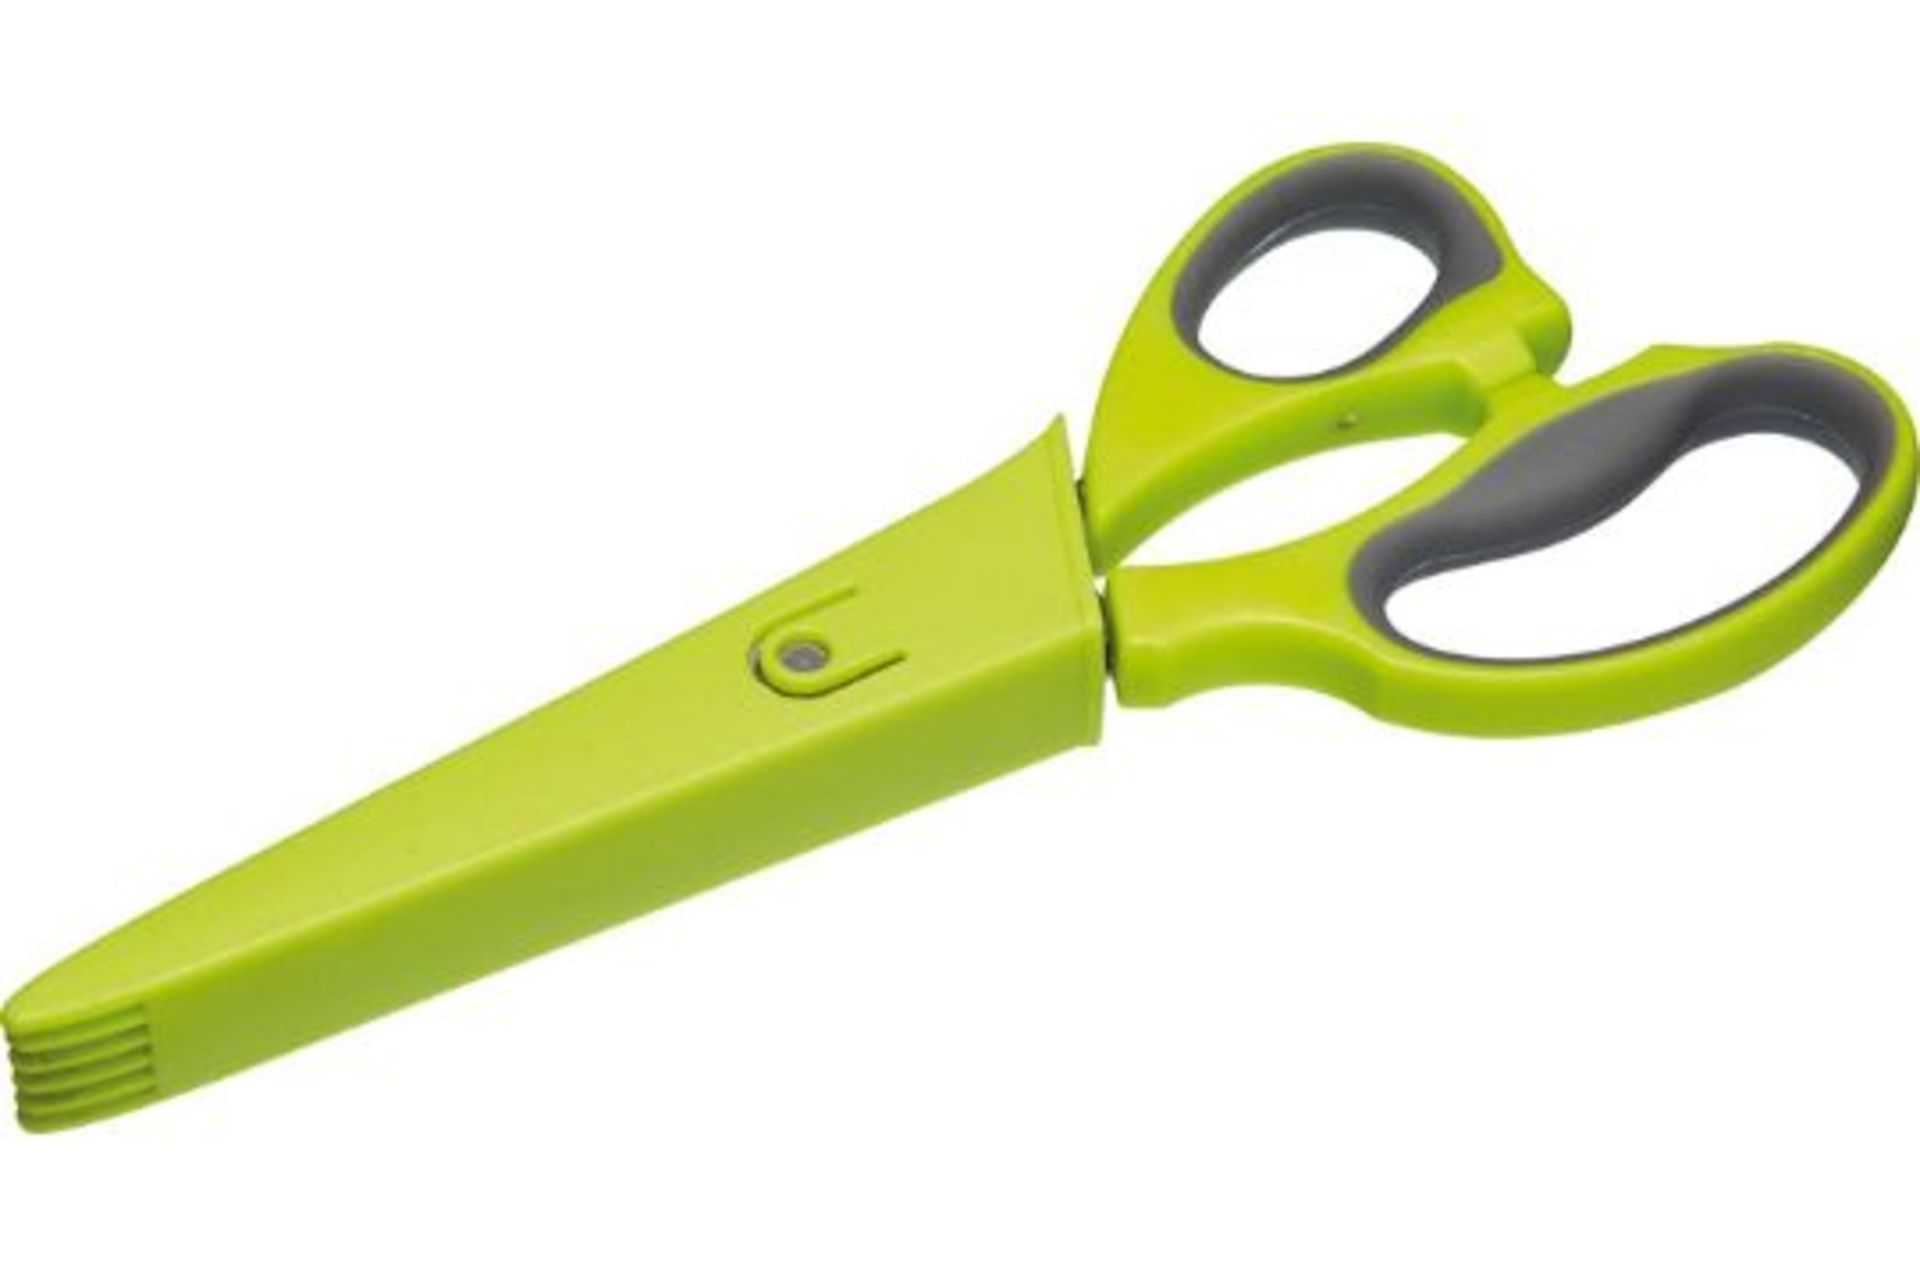 BRAND NEW GARDEN CHEF HERB SCISSORS AND CASE - RRP £7.54 - Image 2 of 2